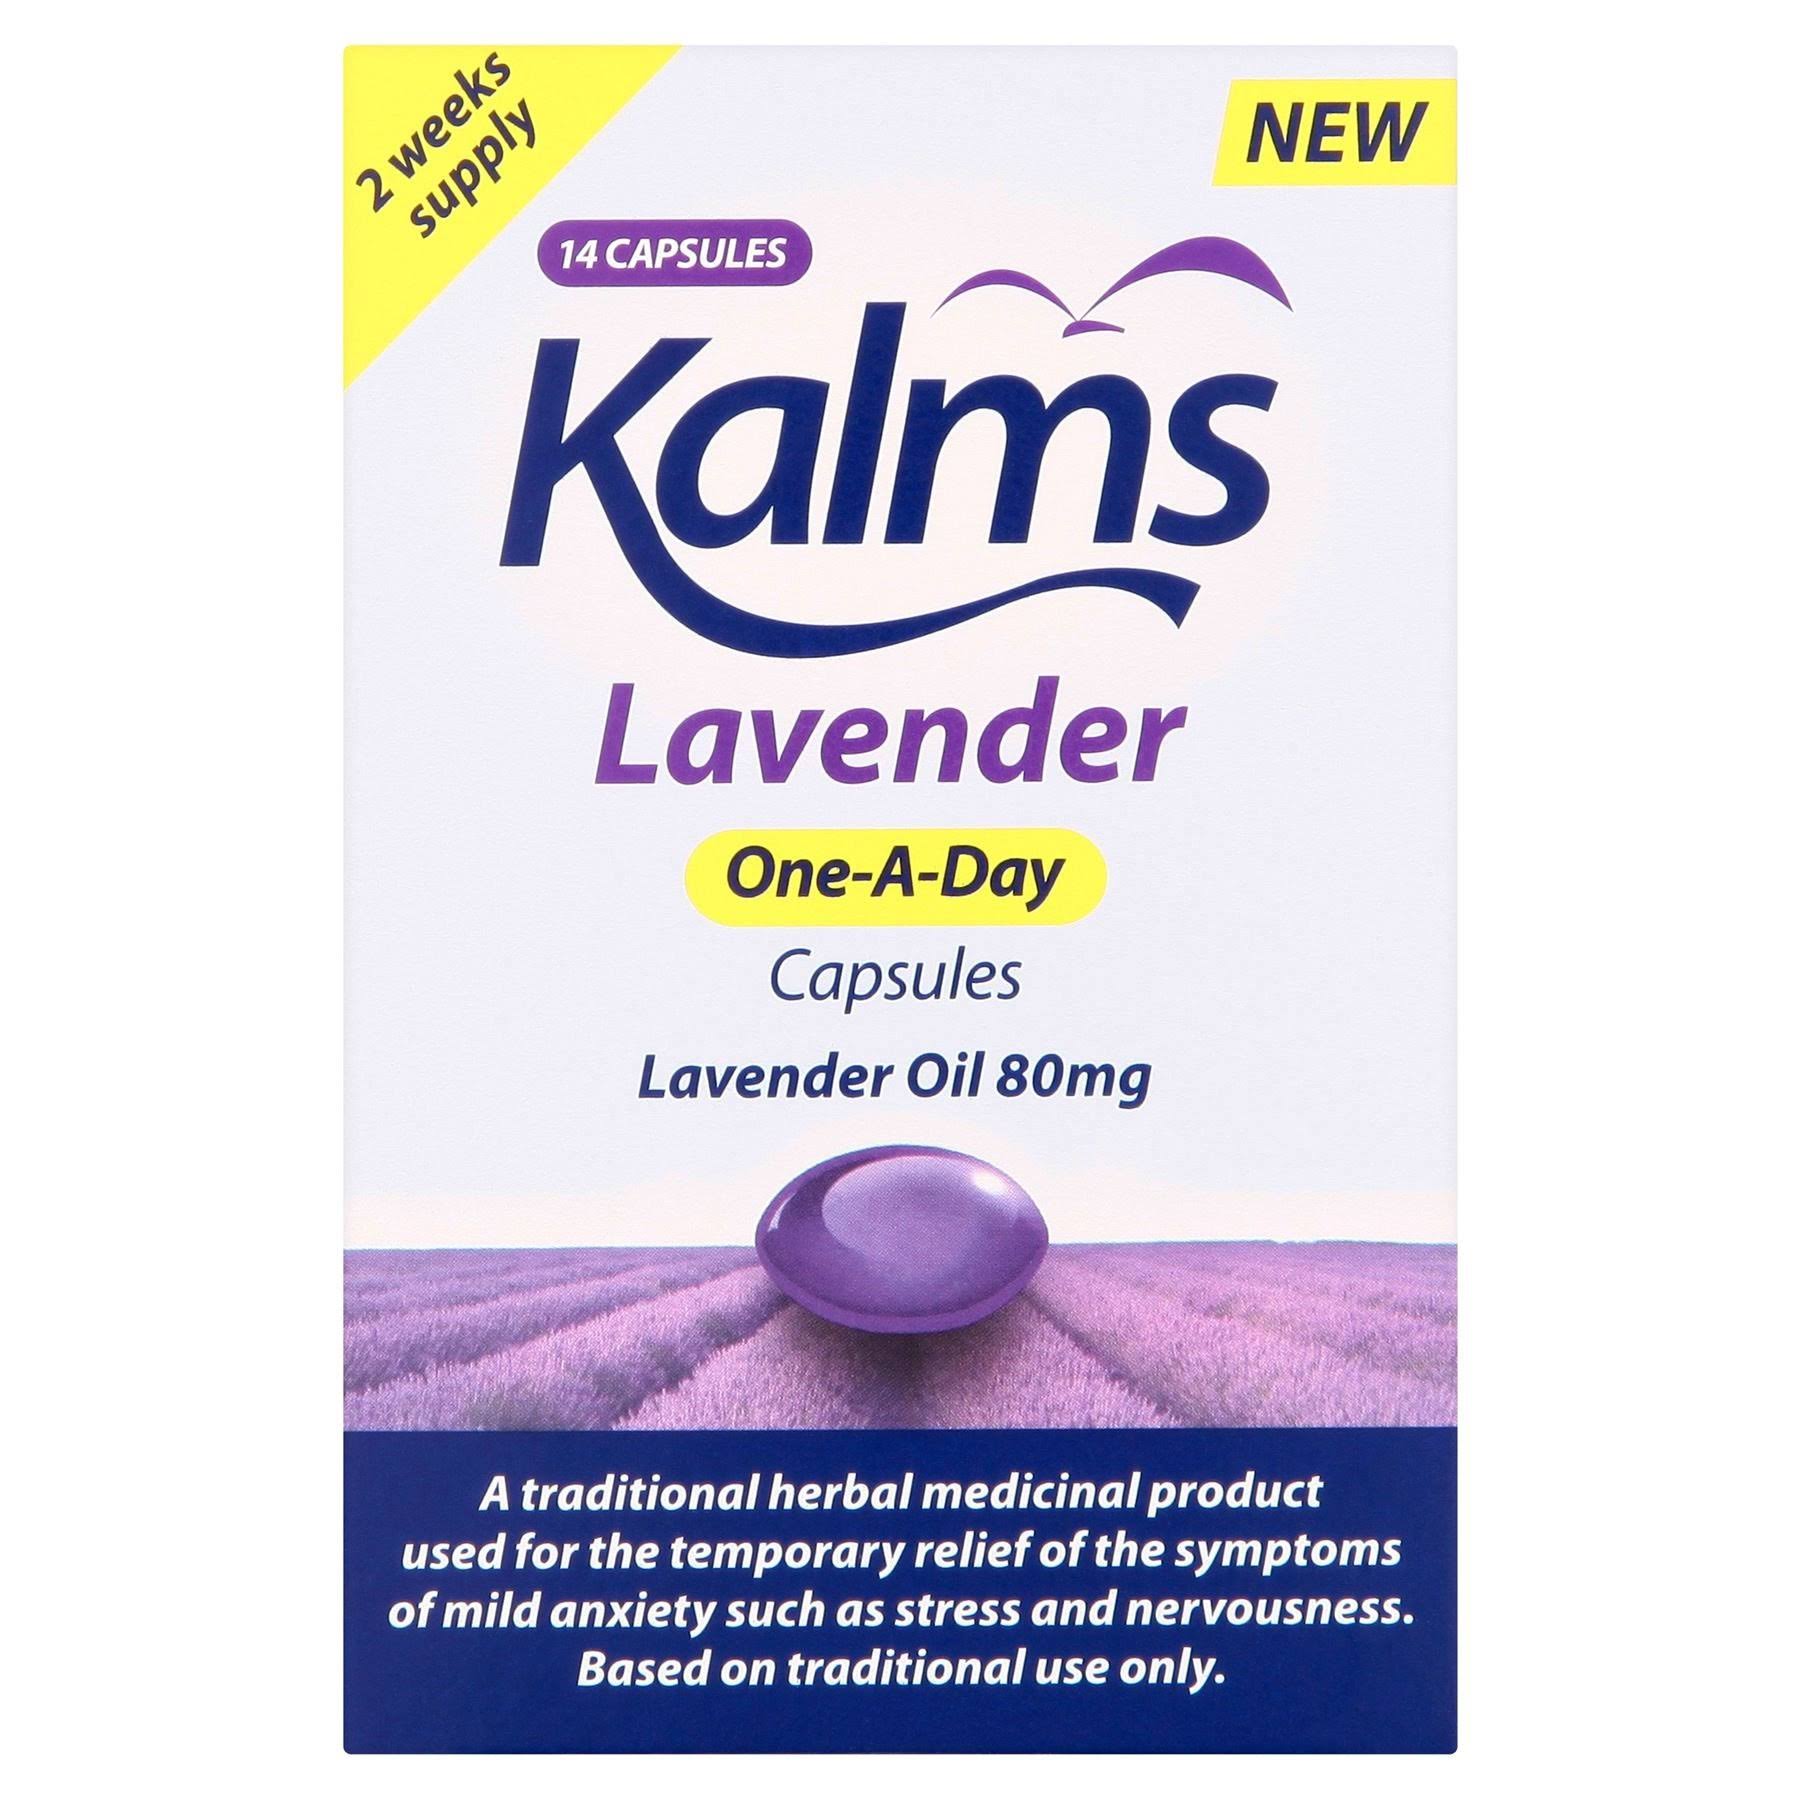 Kalms Lavender One-A-Day Capsules - 14 Caps